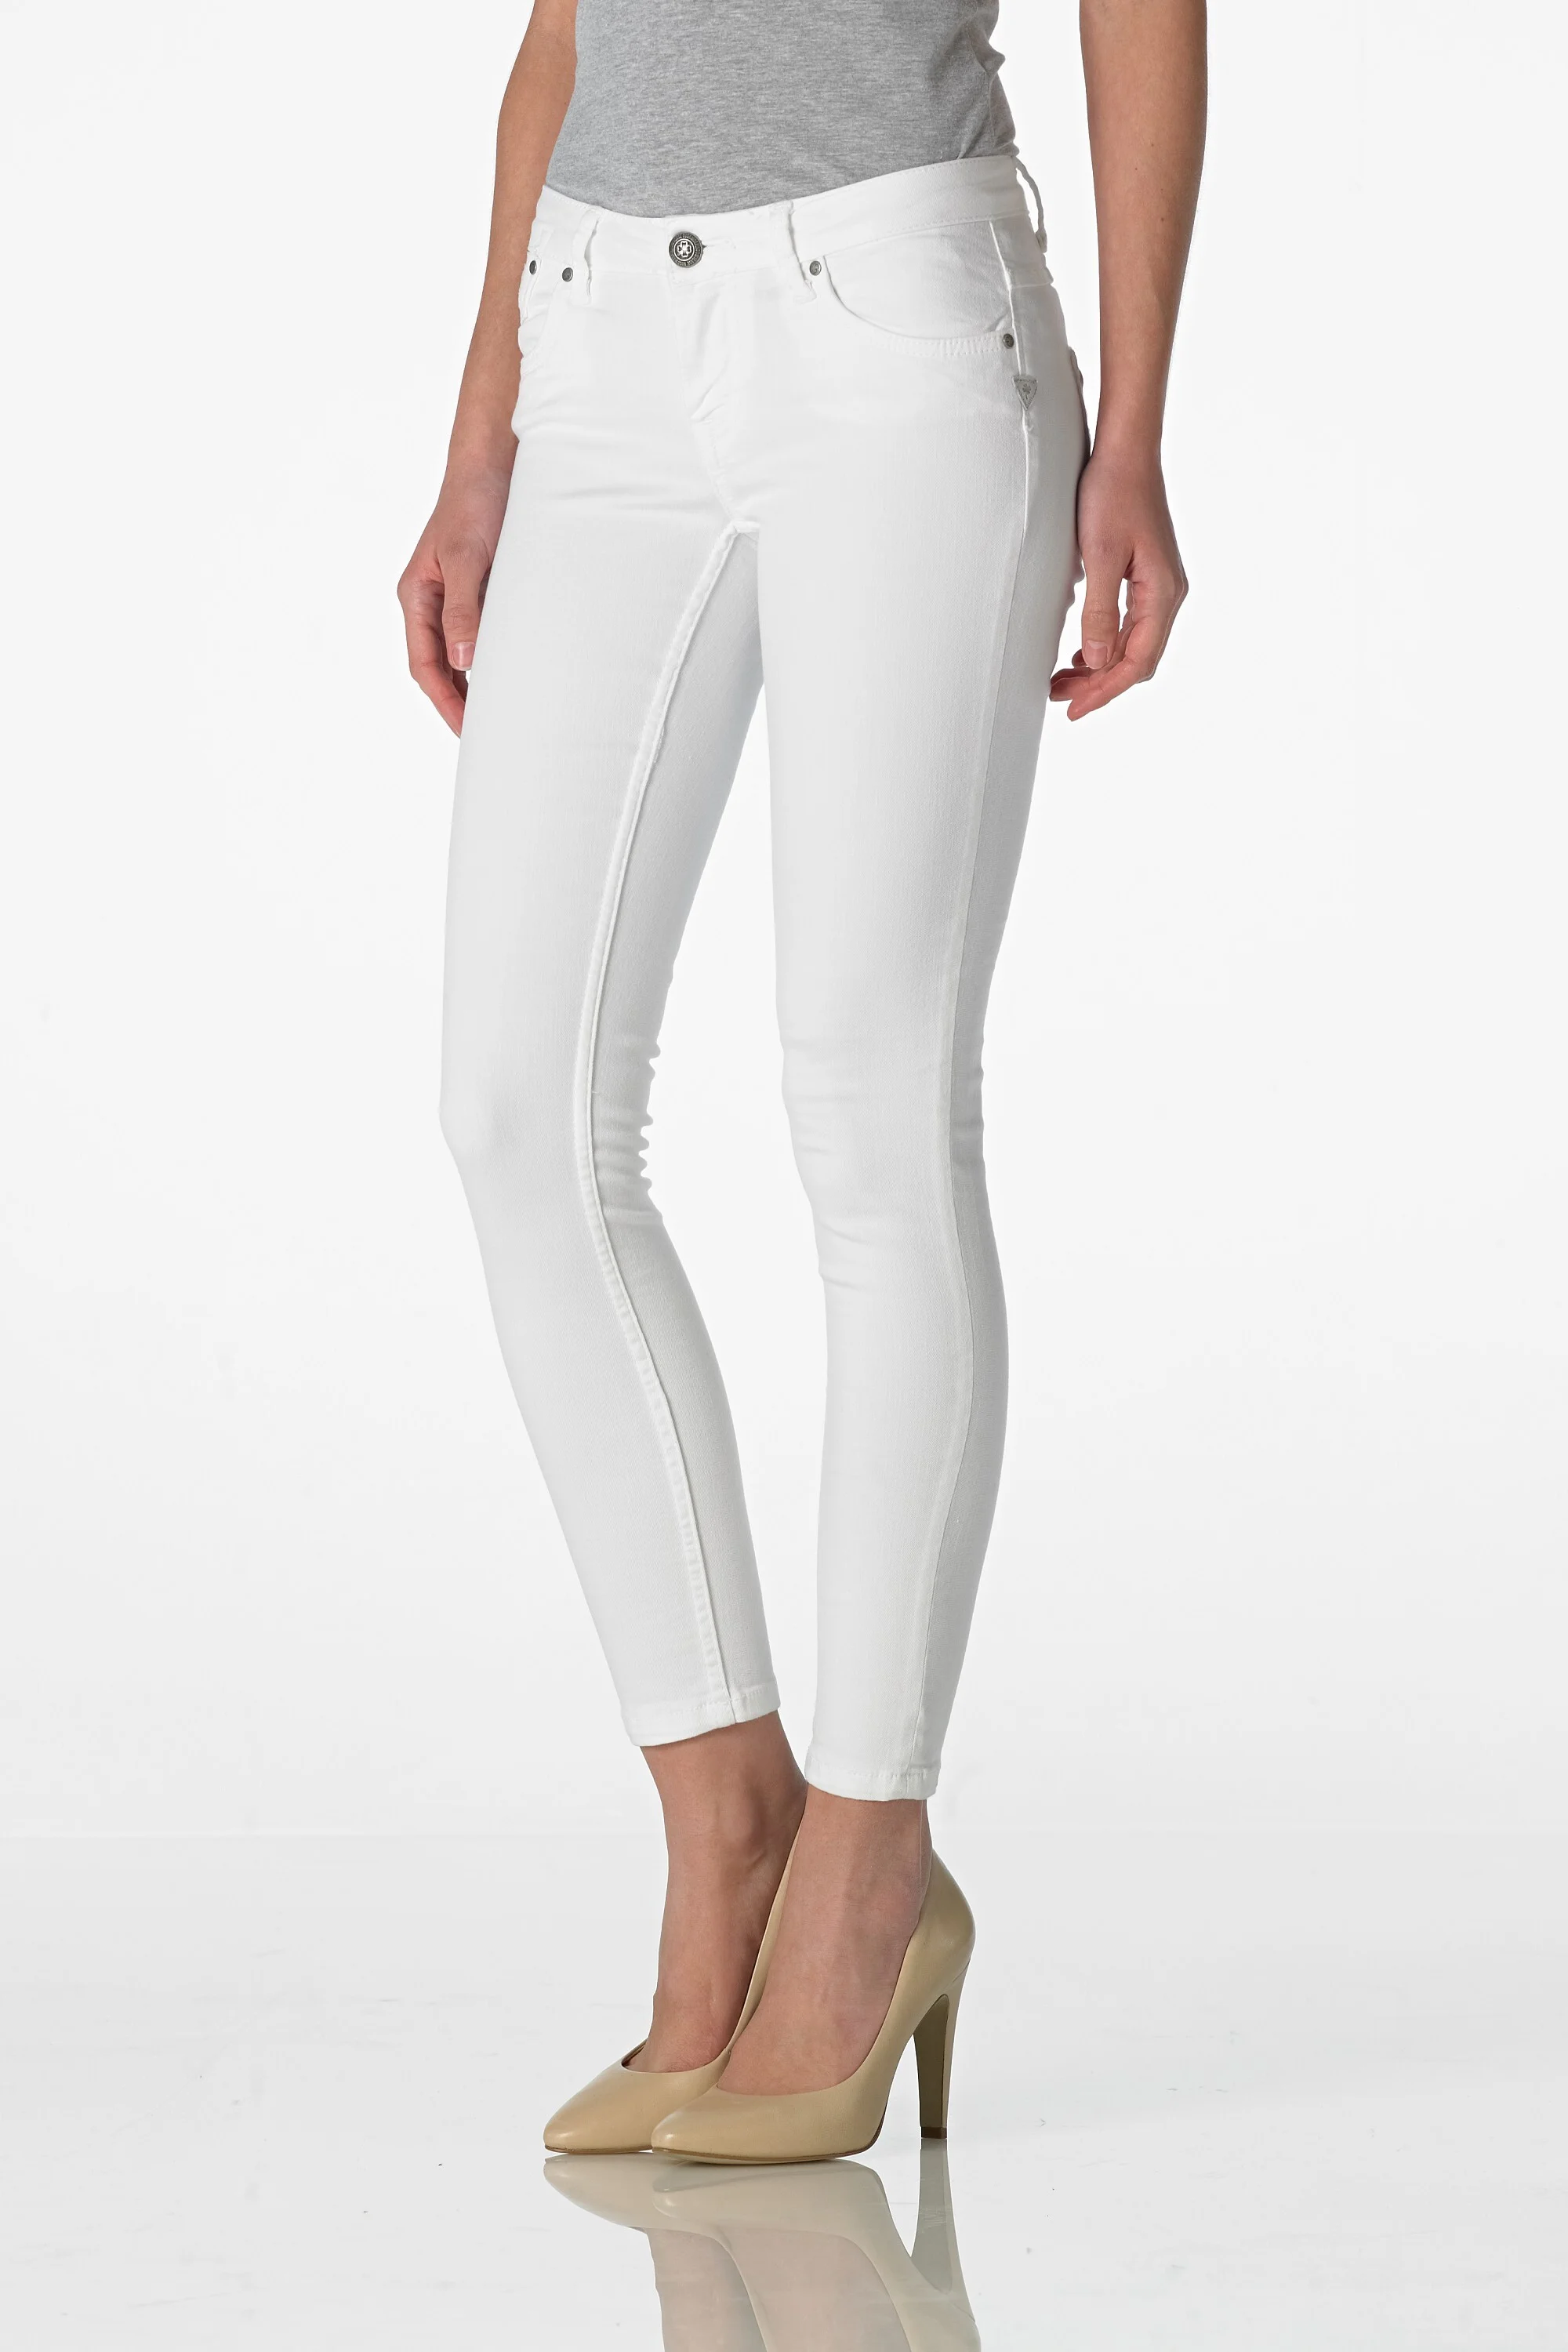 Lilly - Superslim (white cropped)